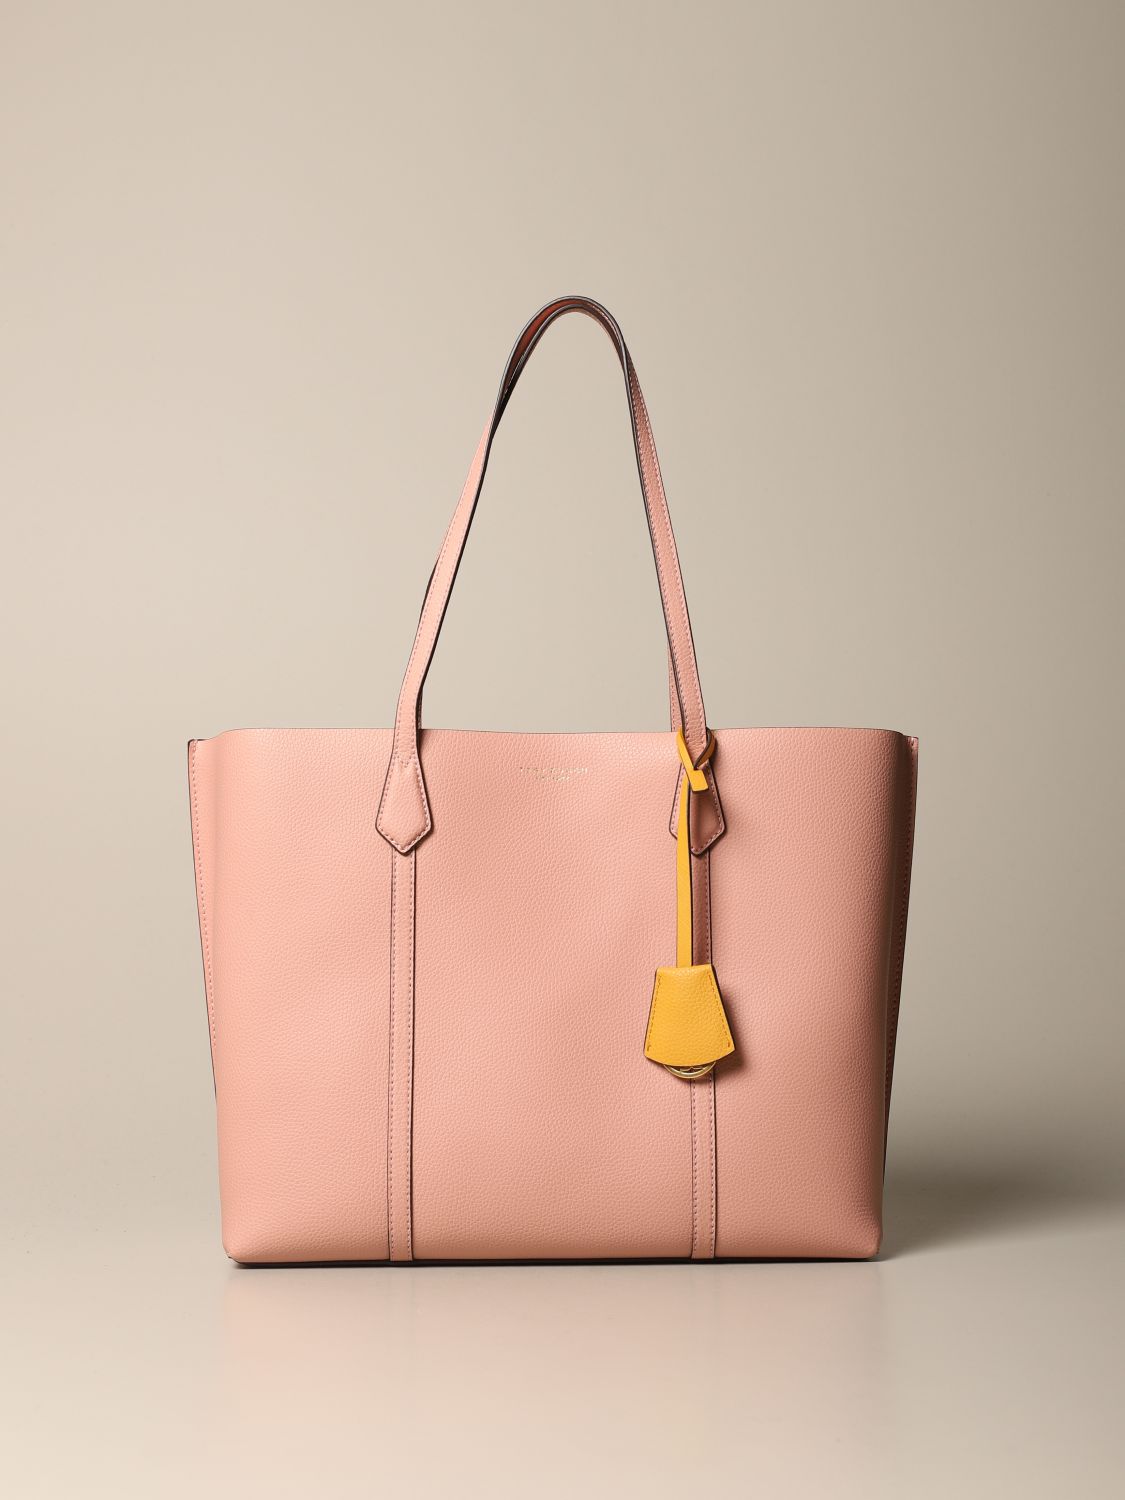 TORY BURCH: Perry bag in textured leather - Pink | Tory Burch tote bags  53245 online on 